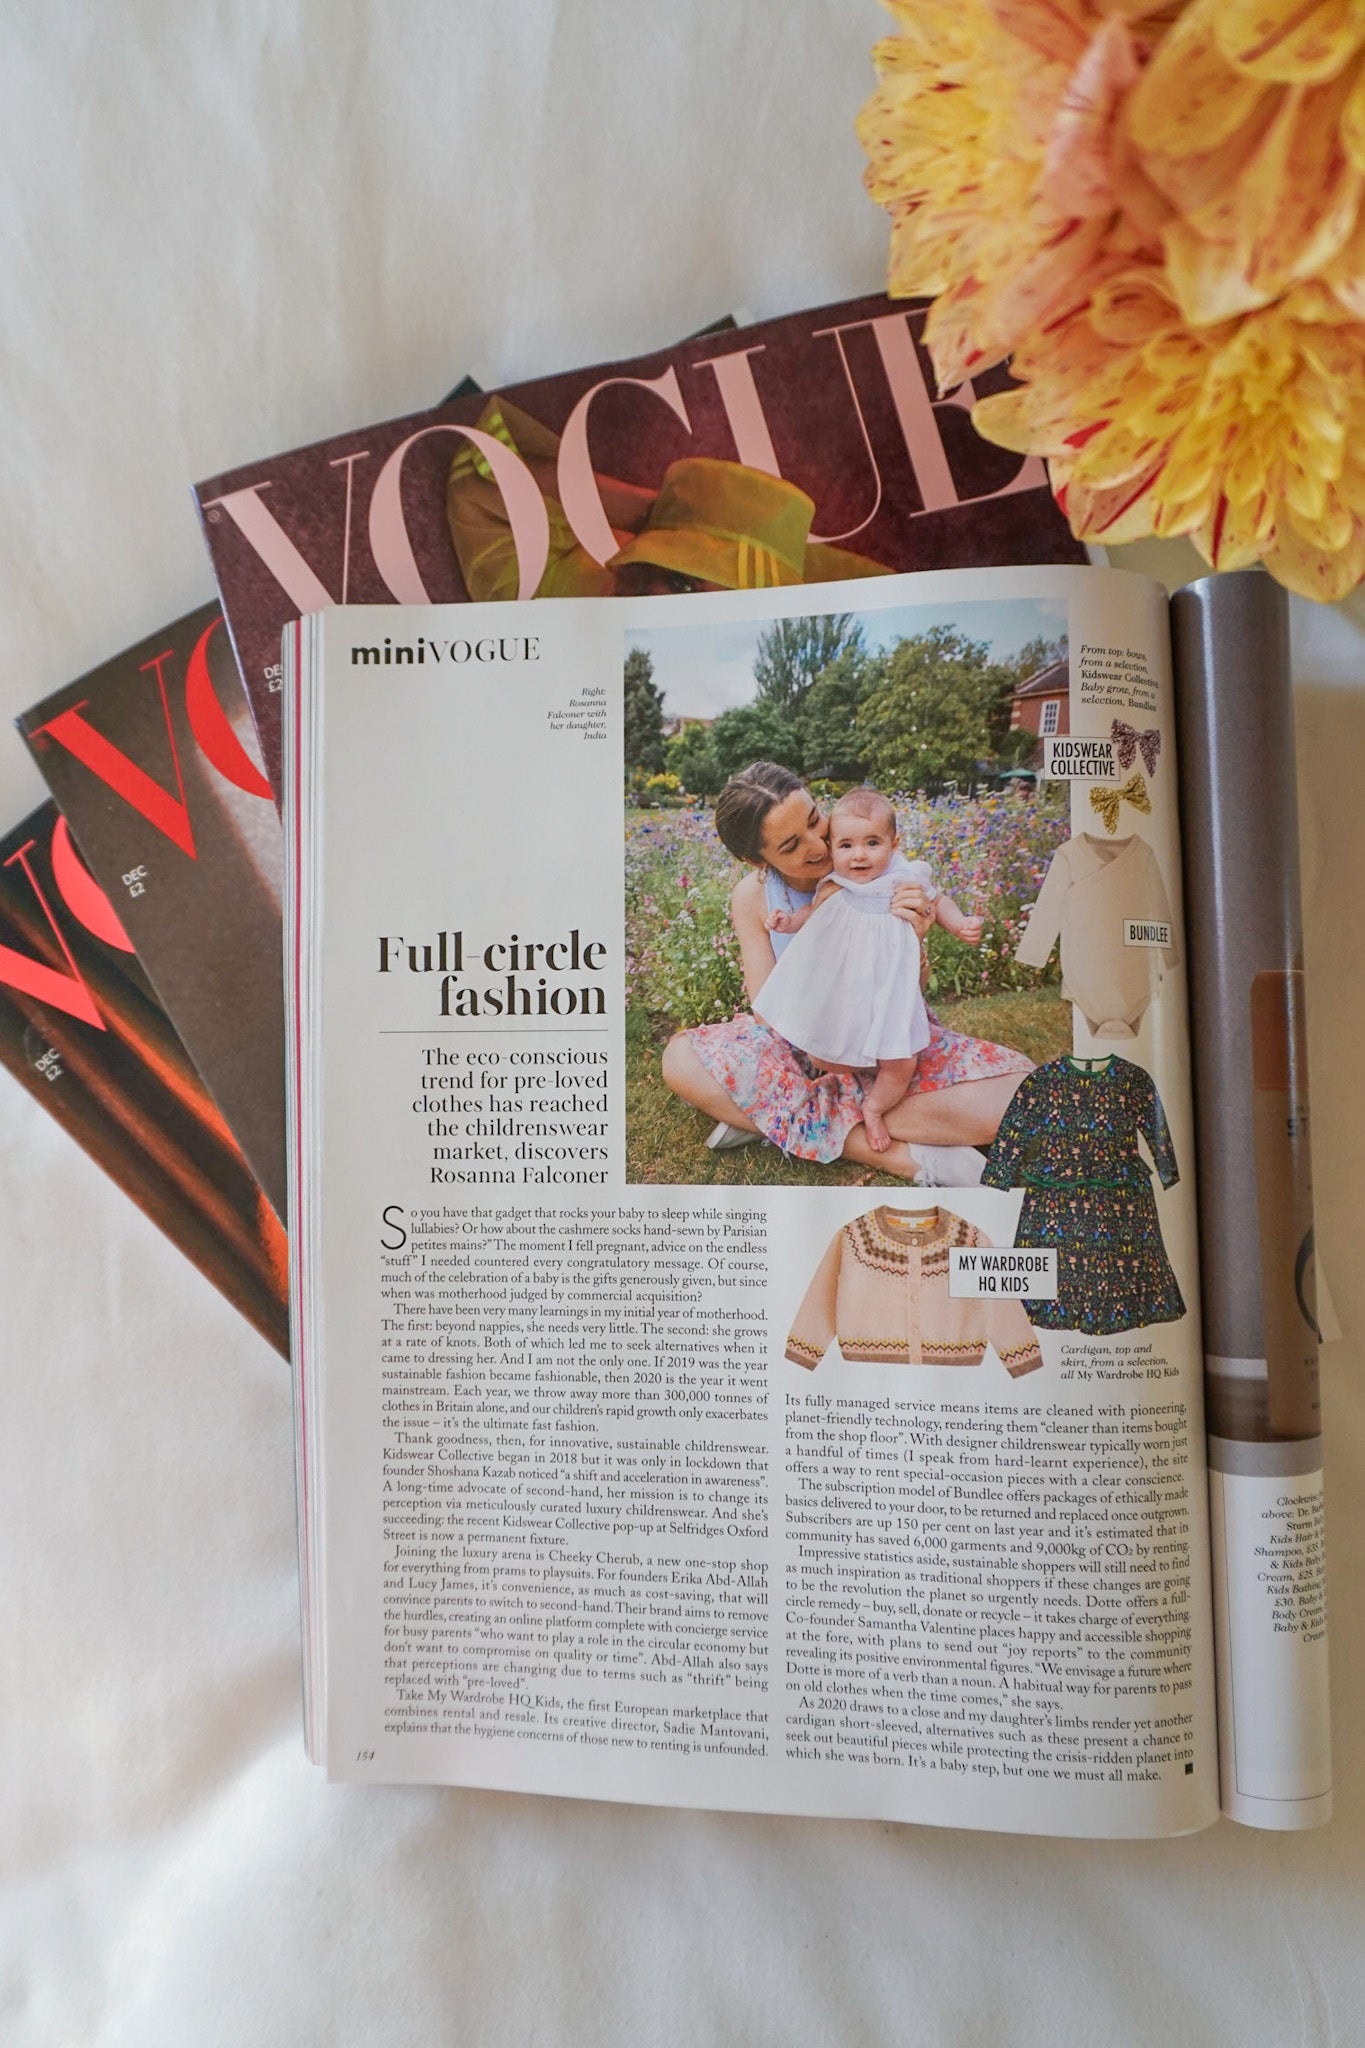 Rosanna Falconer article for Vogue on childrenswear